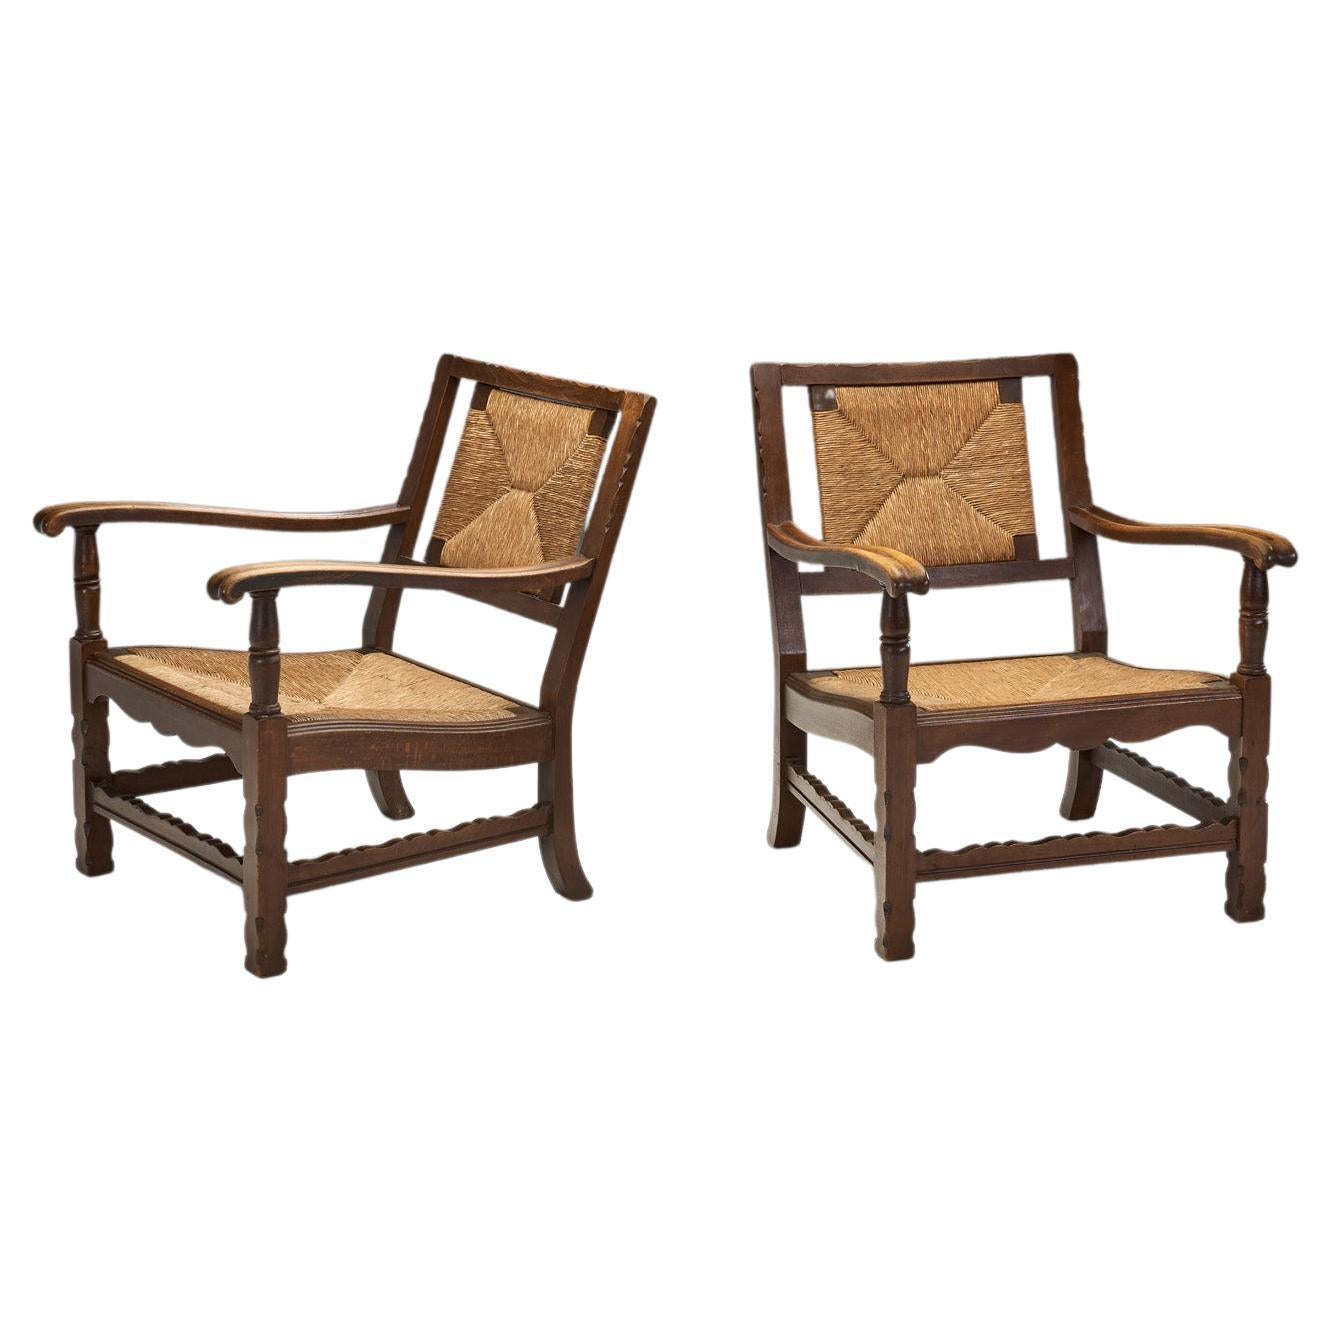 Mid-Century Handcrafted Wood and Woven Straw Armchairs, Europe ca 1950s For Sale